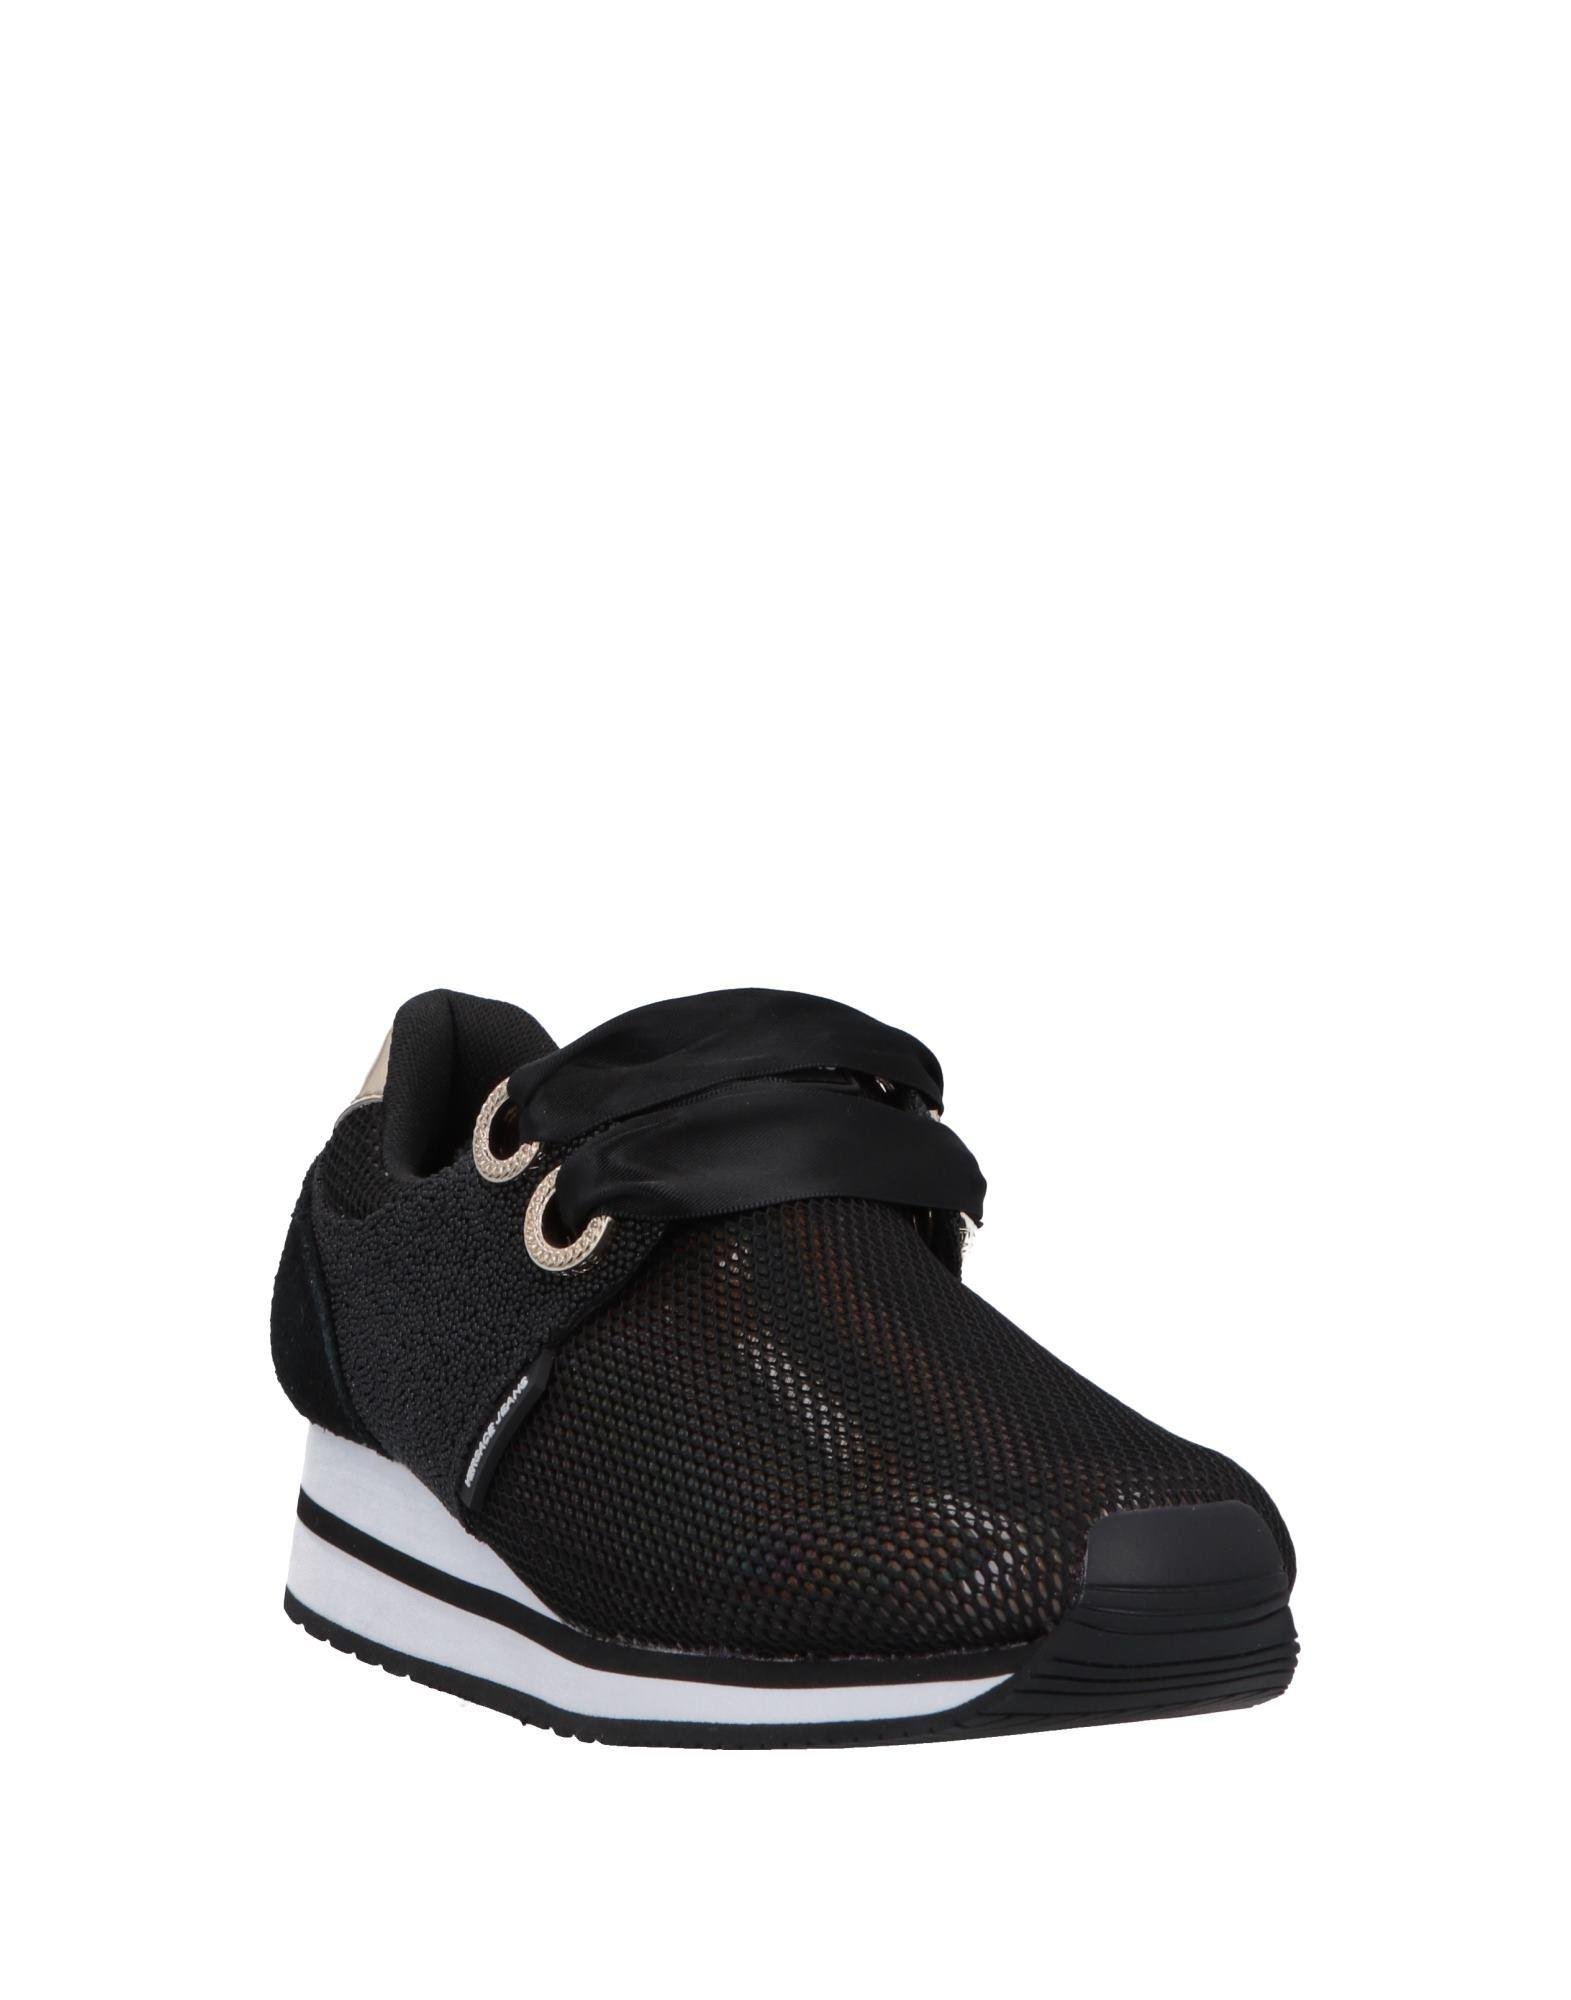 Versace Jeans Leather Low-tops & Sneakers in Black - Save 26% - Lyst